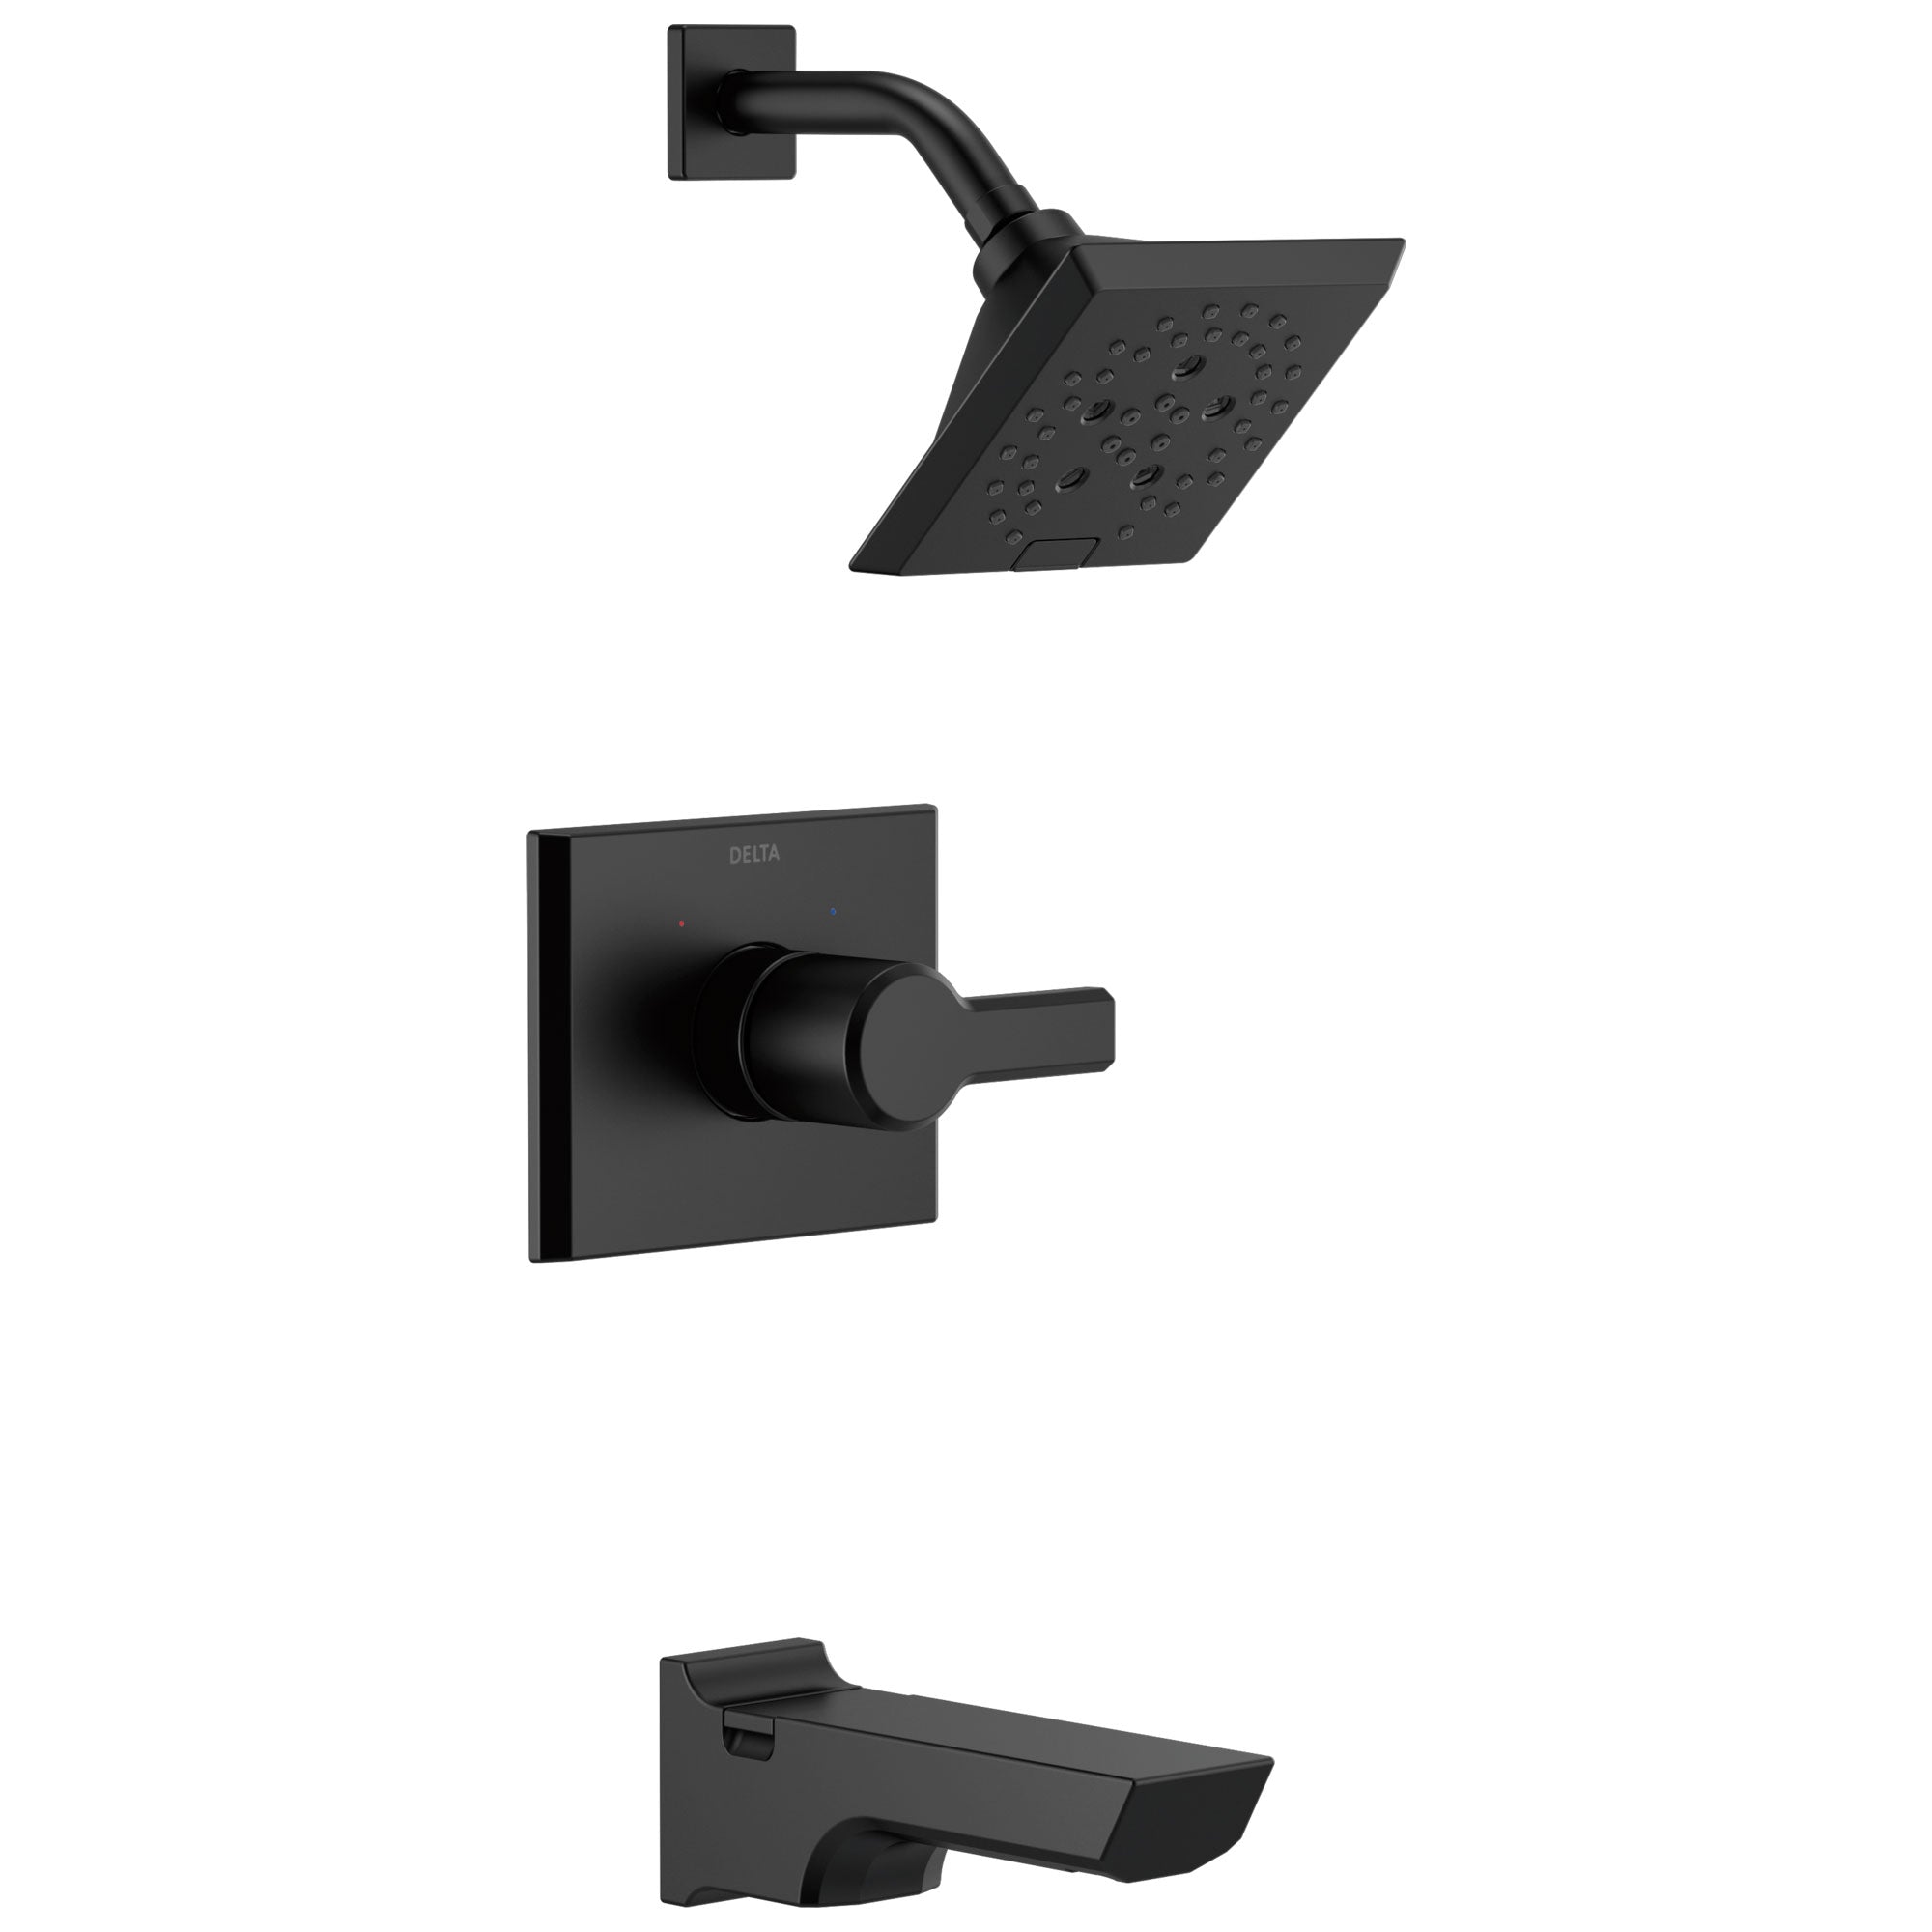 Delta Pivotal Matte Black Finish Tub and Shower Combination Faucet Includes Monitor 14 Series Cartridge, Handle, and Valve without Stops D3421V